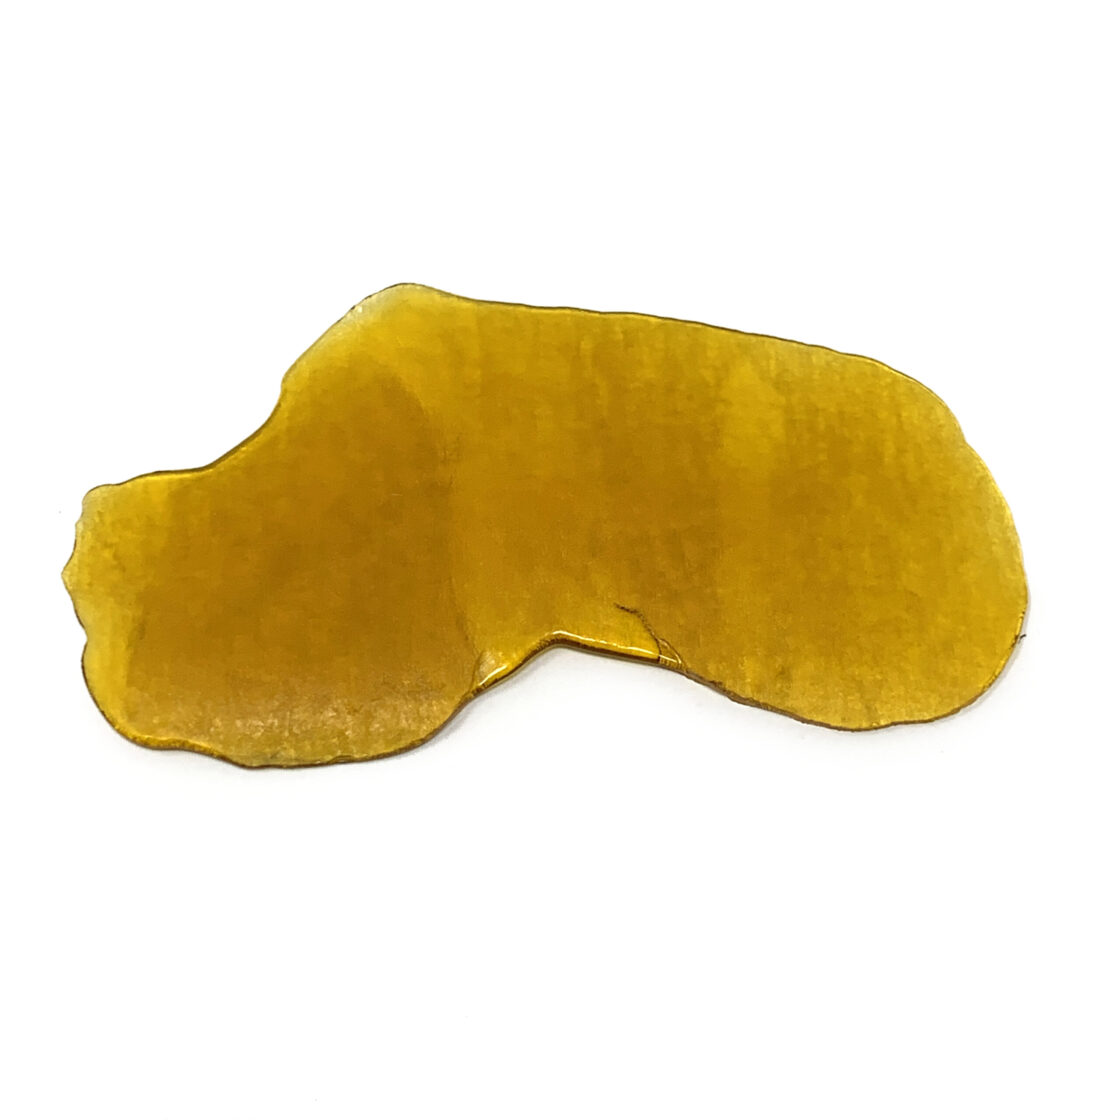 Enigma Extracts – Shatter – White Bananas